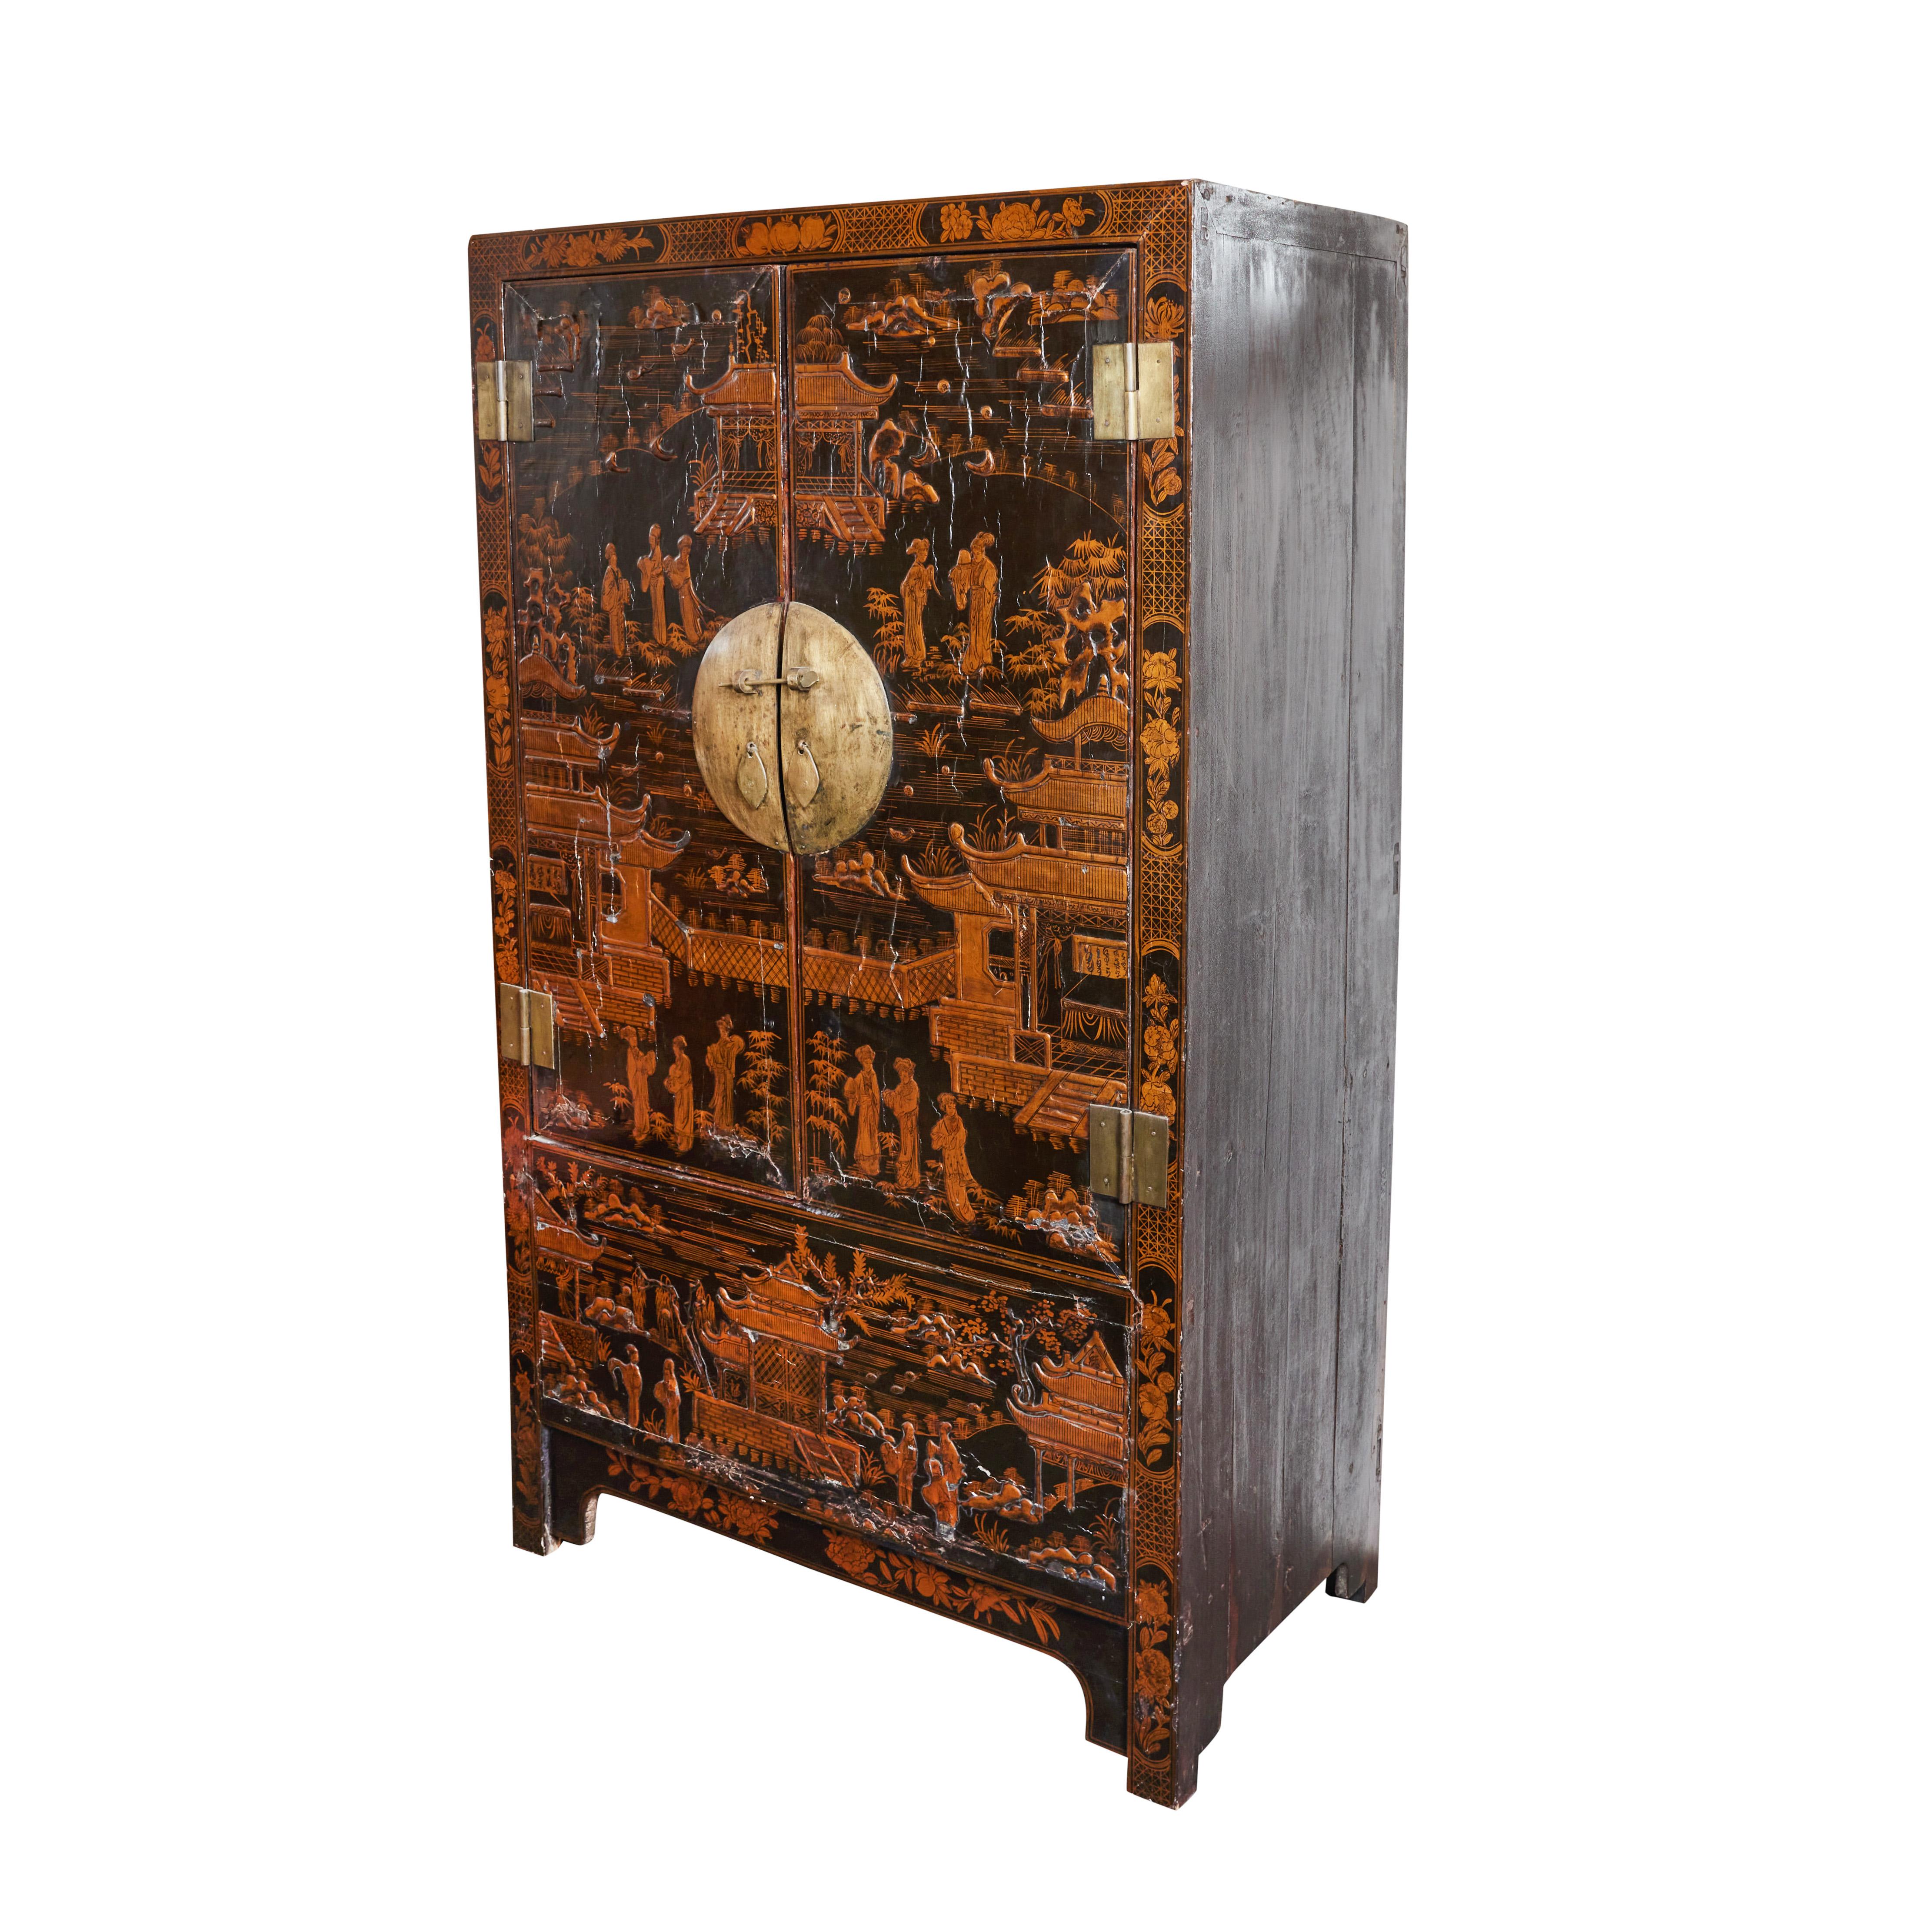 Continental 2 door hand painted and lacquered cabinet with Chinoiserie design on front. Antiqued bronze hardware. 2 interior shelves.